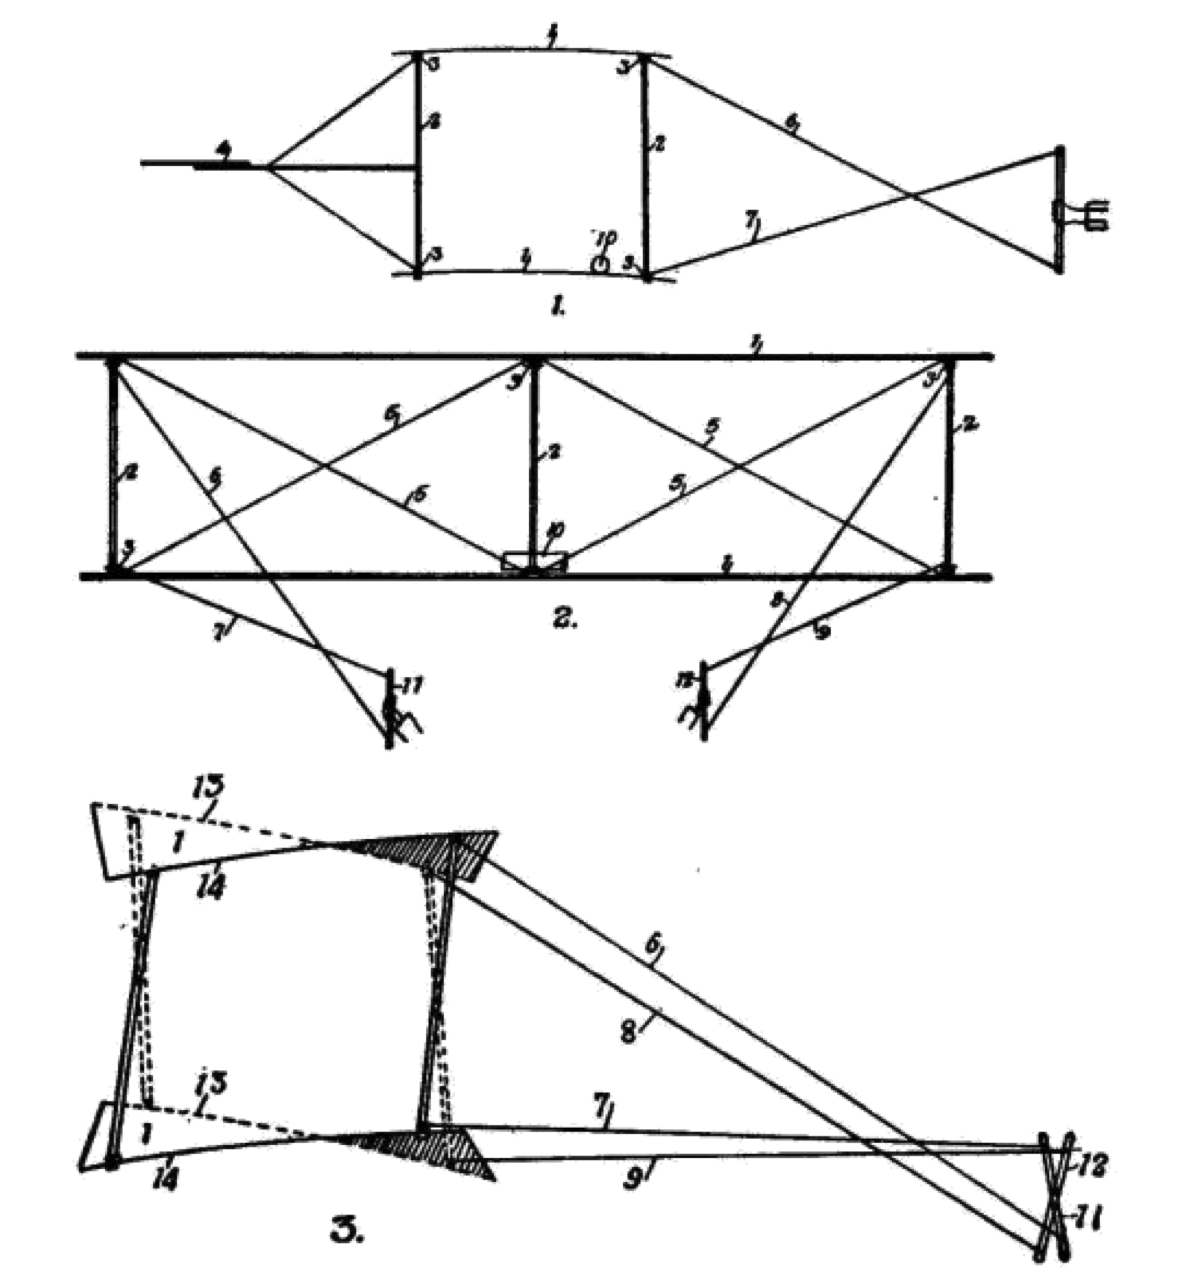 The Wrights patented their wing warping mechanism to control roll.